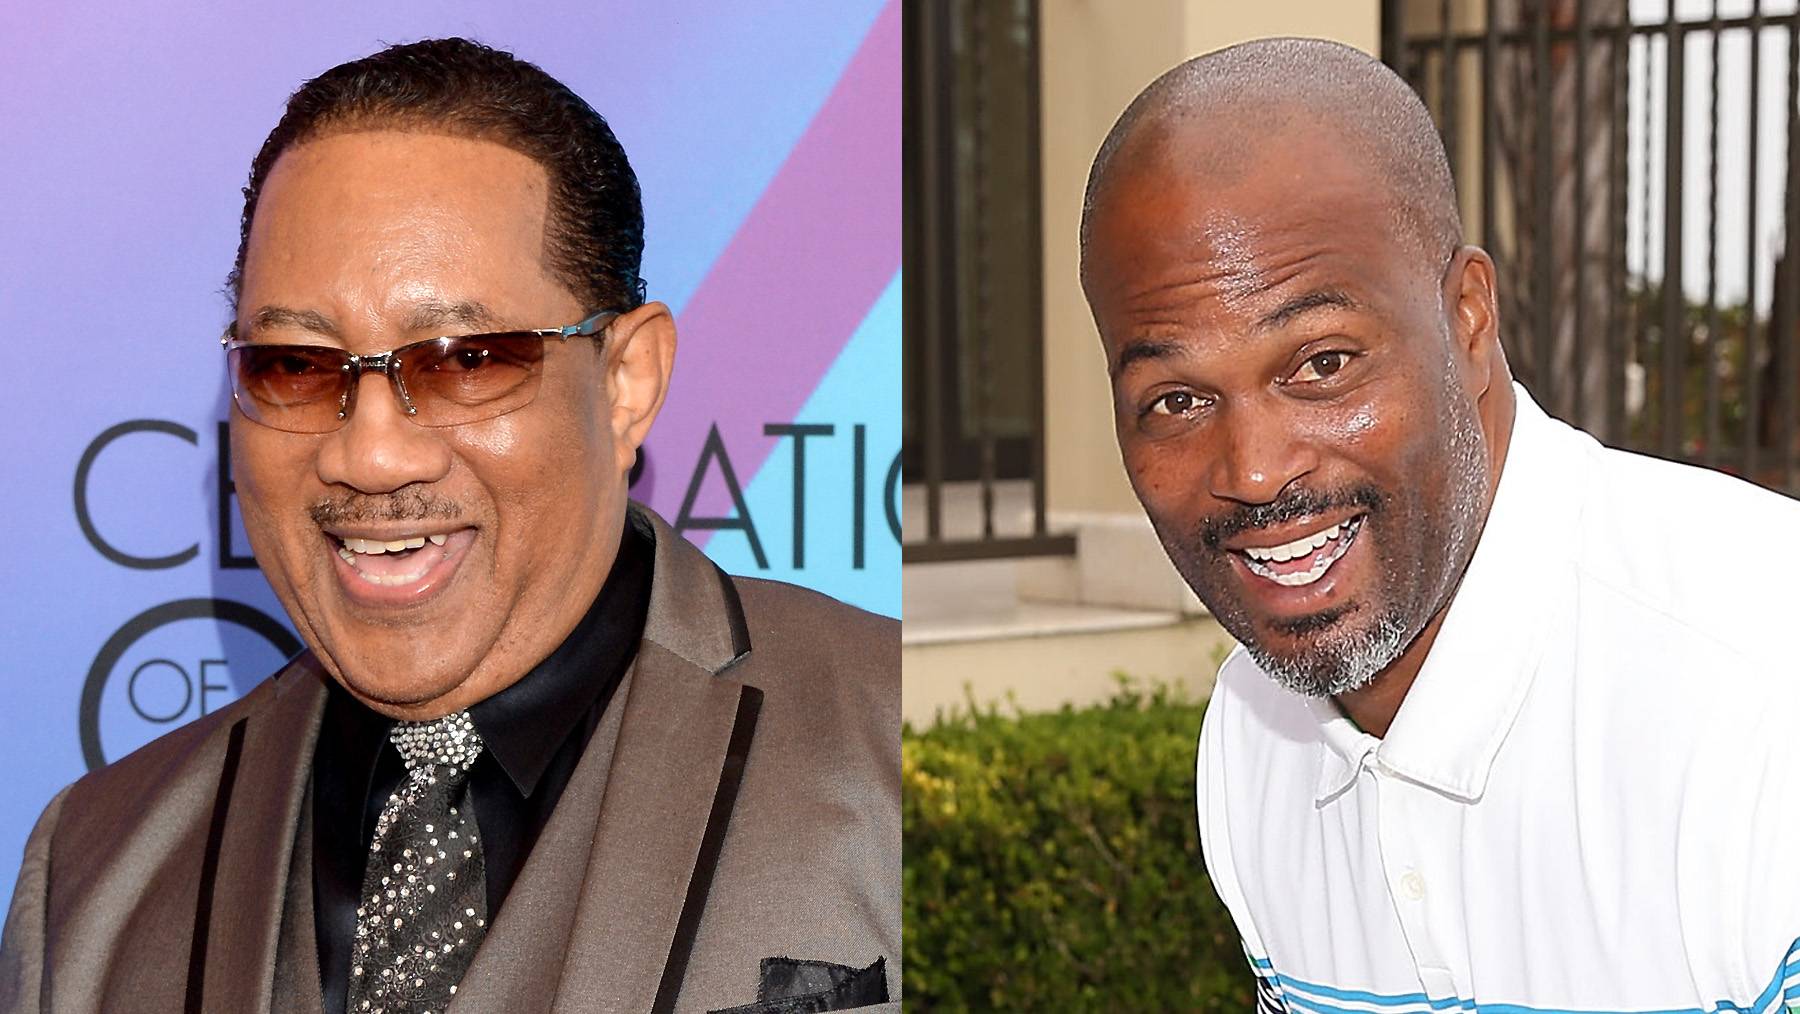 Next Week On Lift Every Voice: Dr. Bobby Jones &amp; Chris Spencer - Dr. Bobby Jones and Chris Spencer sit down with Fonzworth Bentley to disuss their careers, future and more on Lift Every Voice. (Photos from left: Jason Kempin/Getty Images for BET, Jesse Grant/Getty Images for BET)